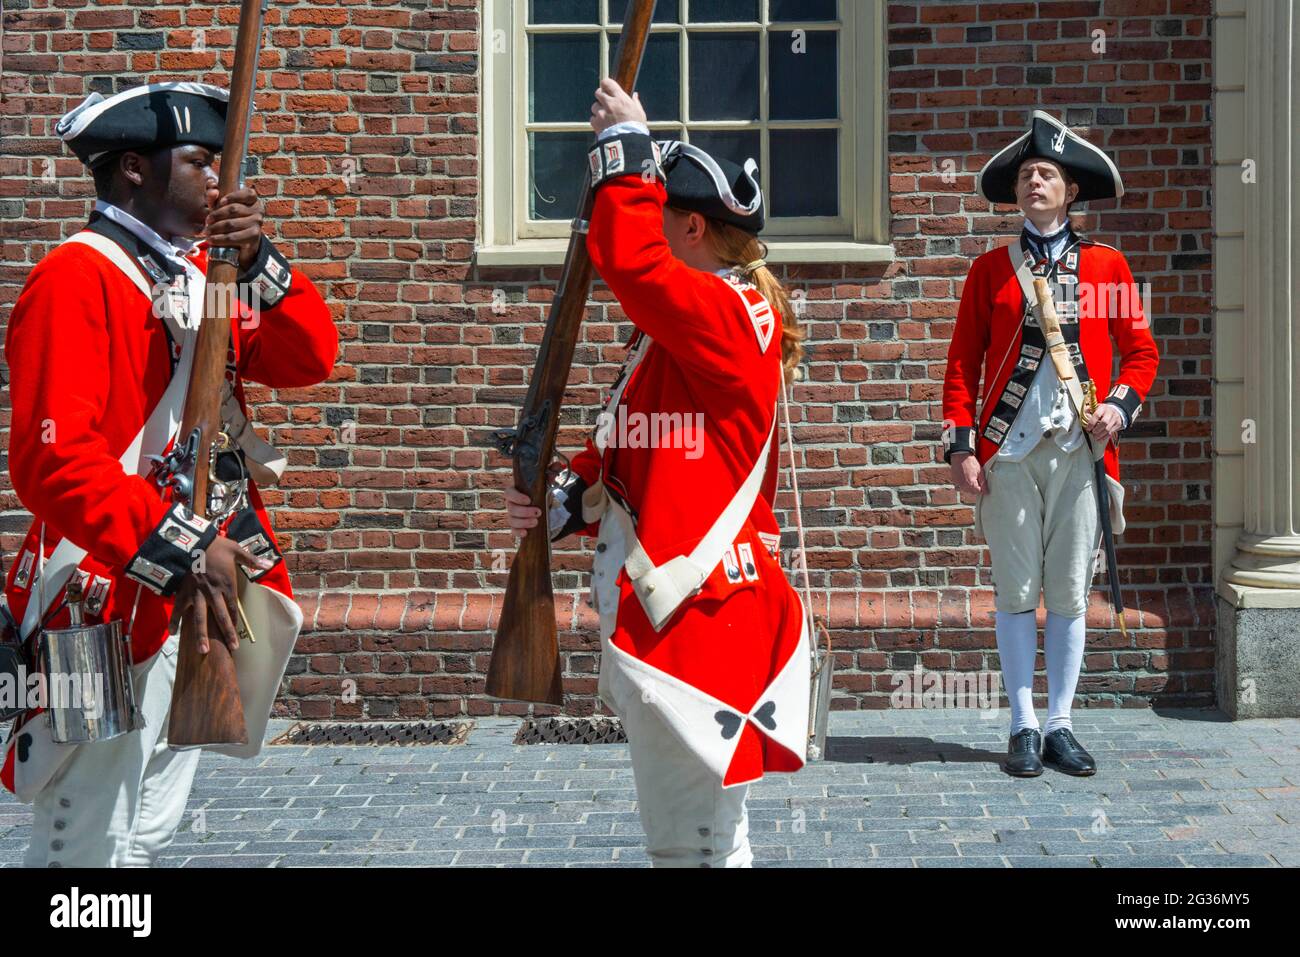 Boston Harborfest Redcoats Soldiers dressed in British Army Uniform reinact  a key ceremony parade in front of The Old State House Boston Massachusetts  Stock Photo - Alamy